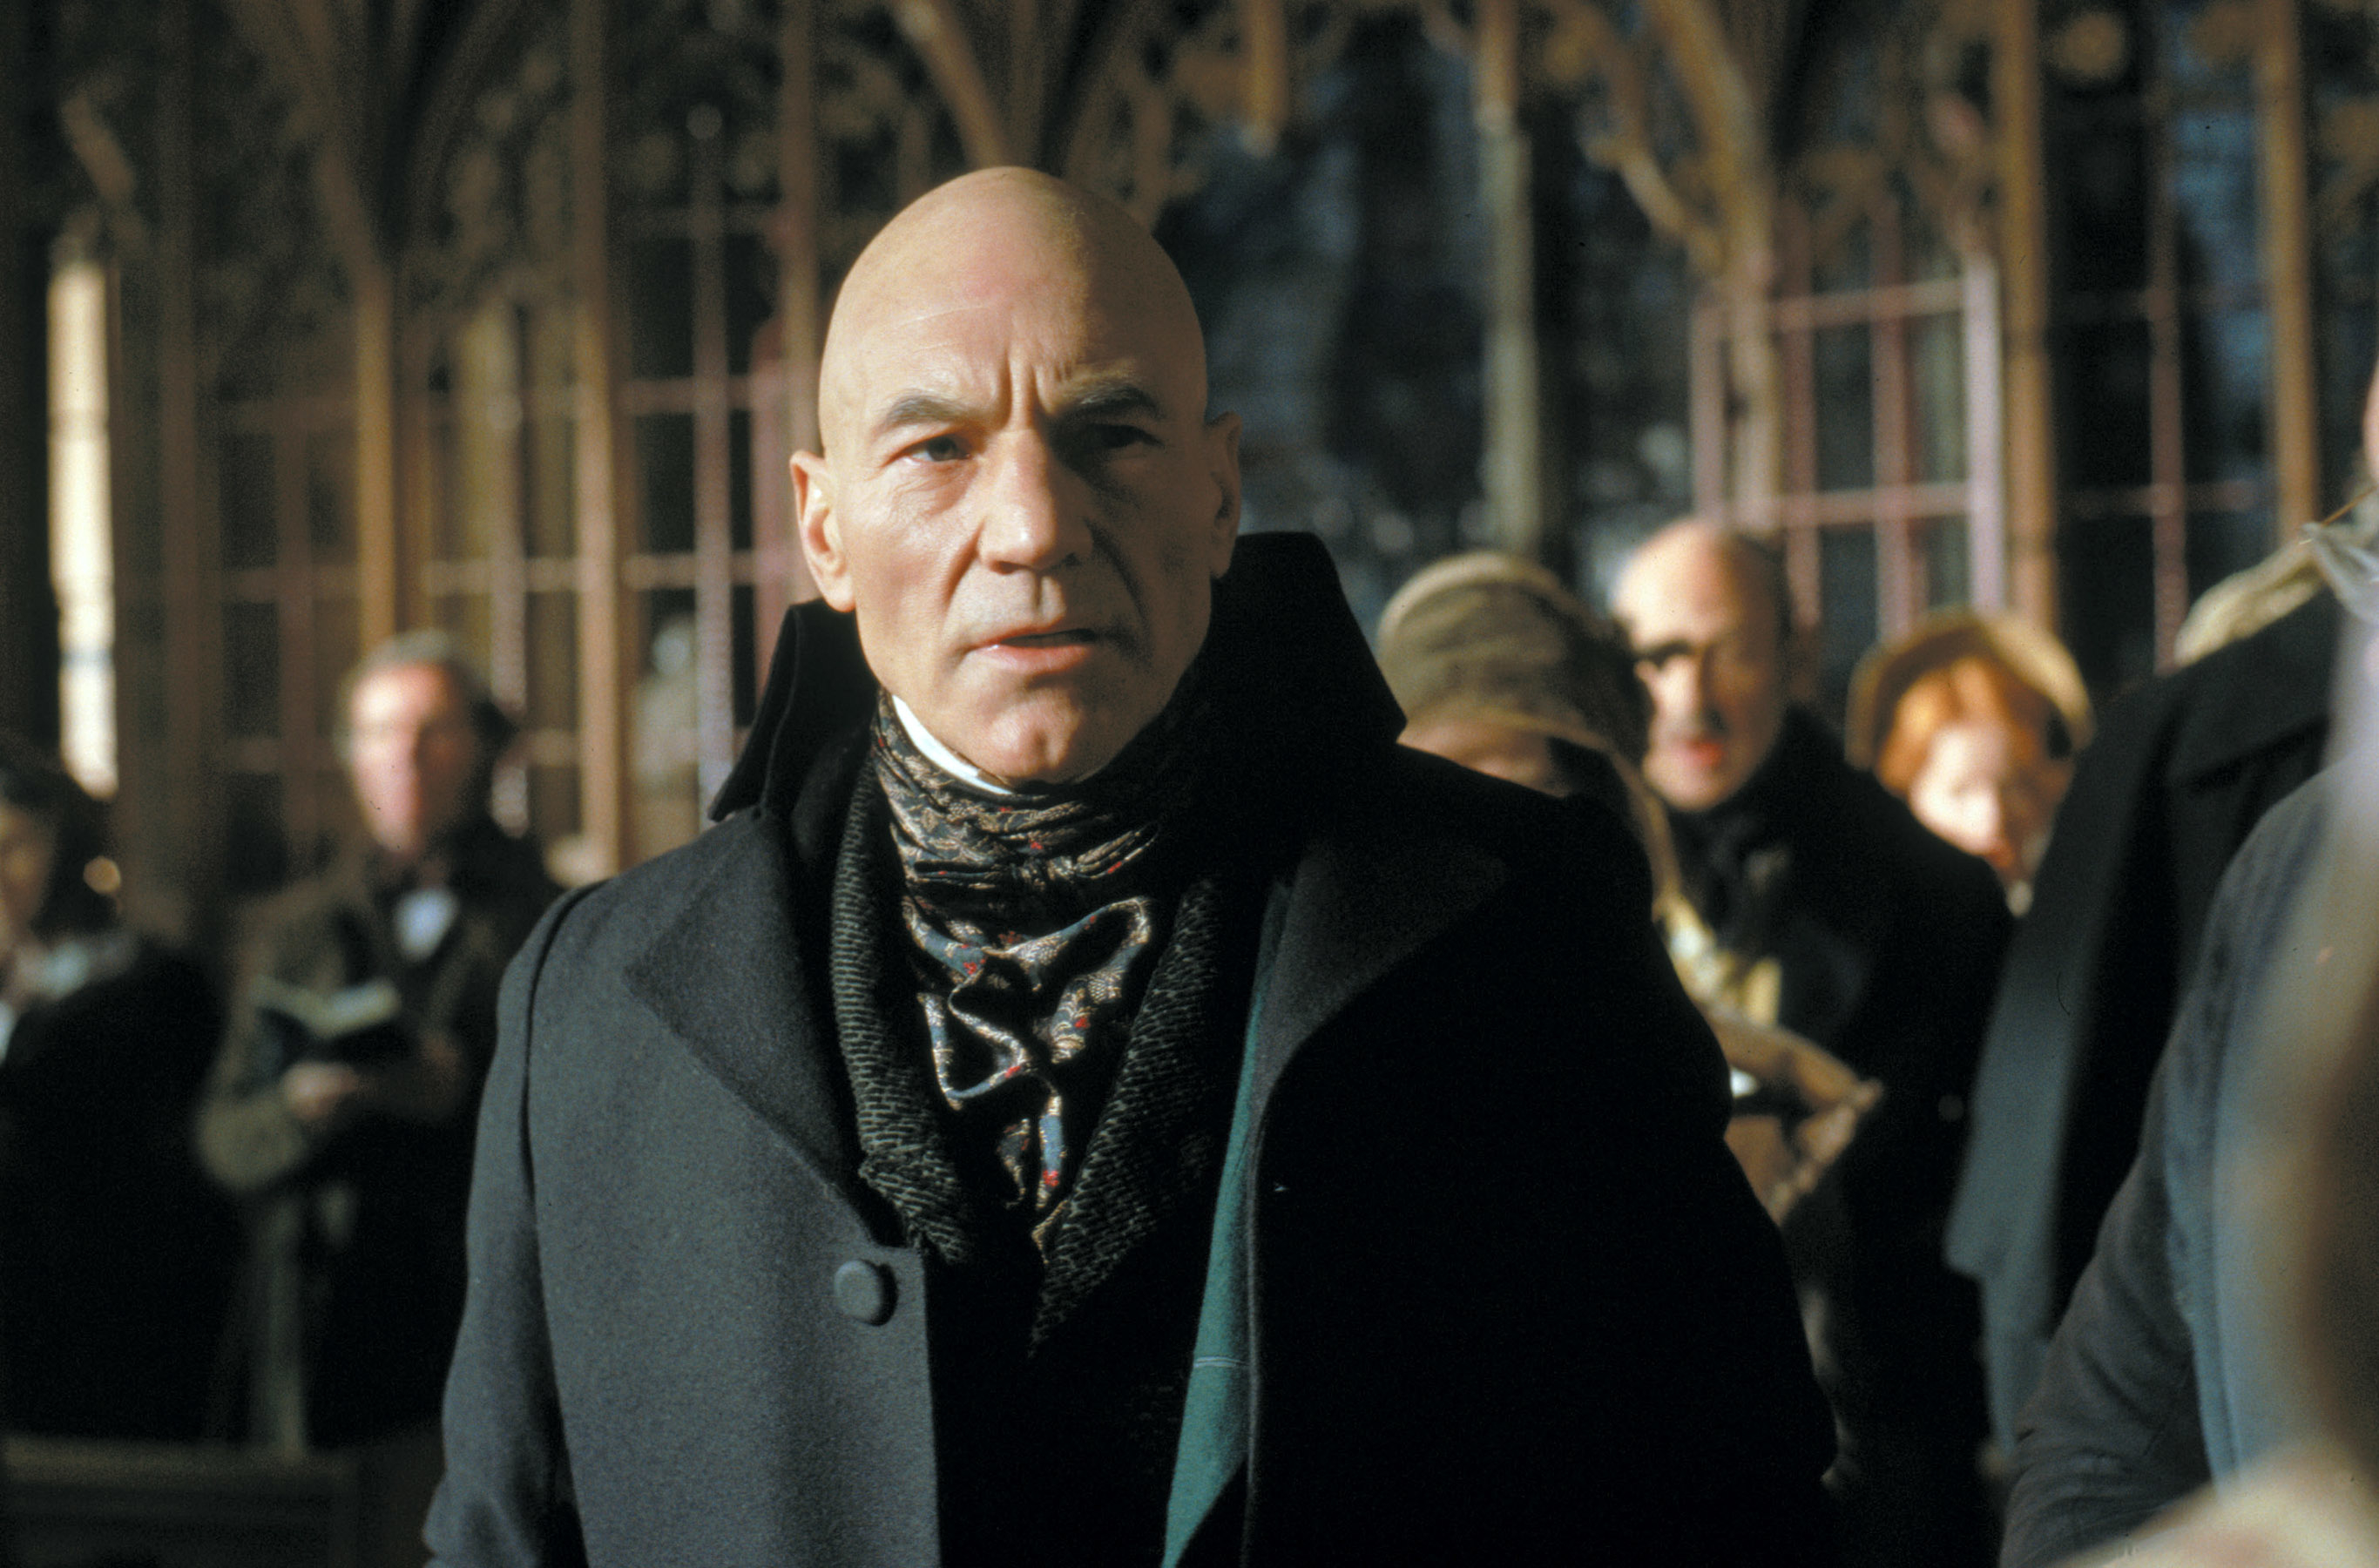 patrick stewart in a trench coat and scarf